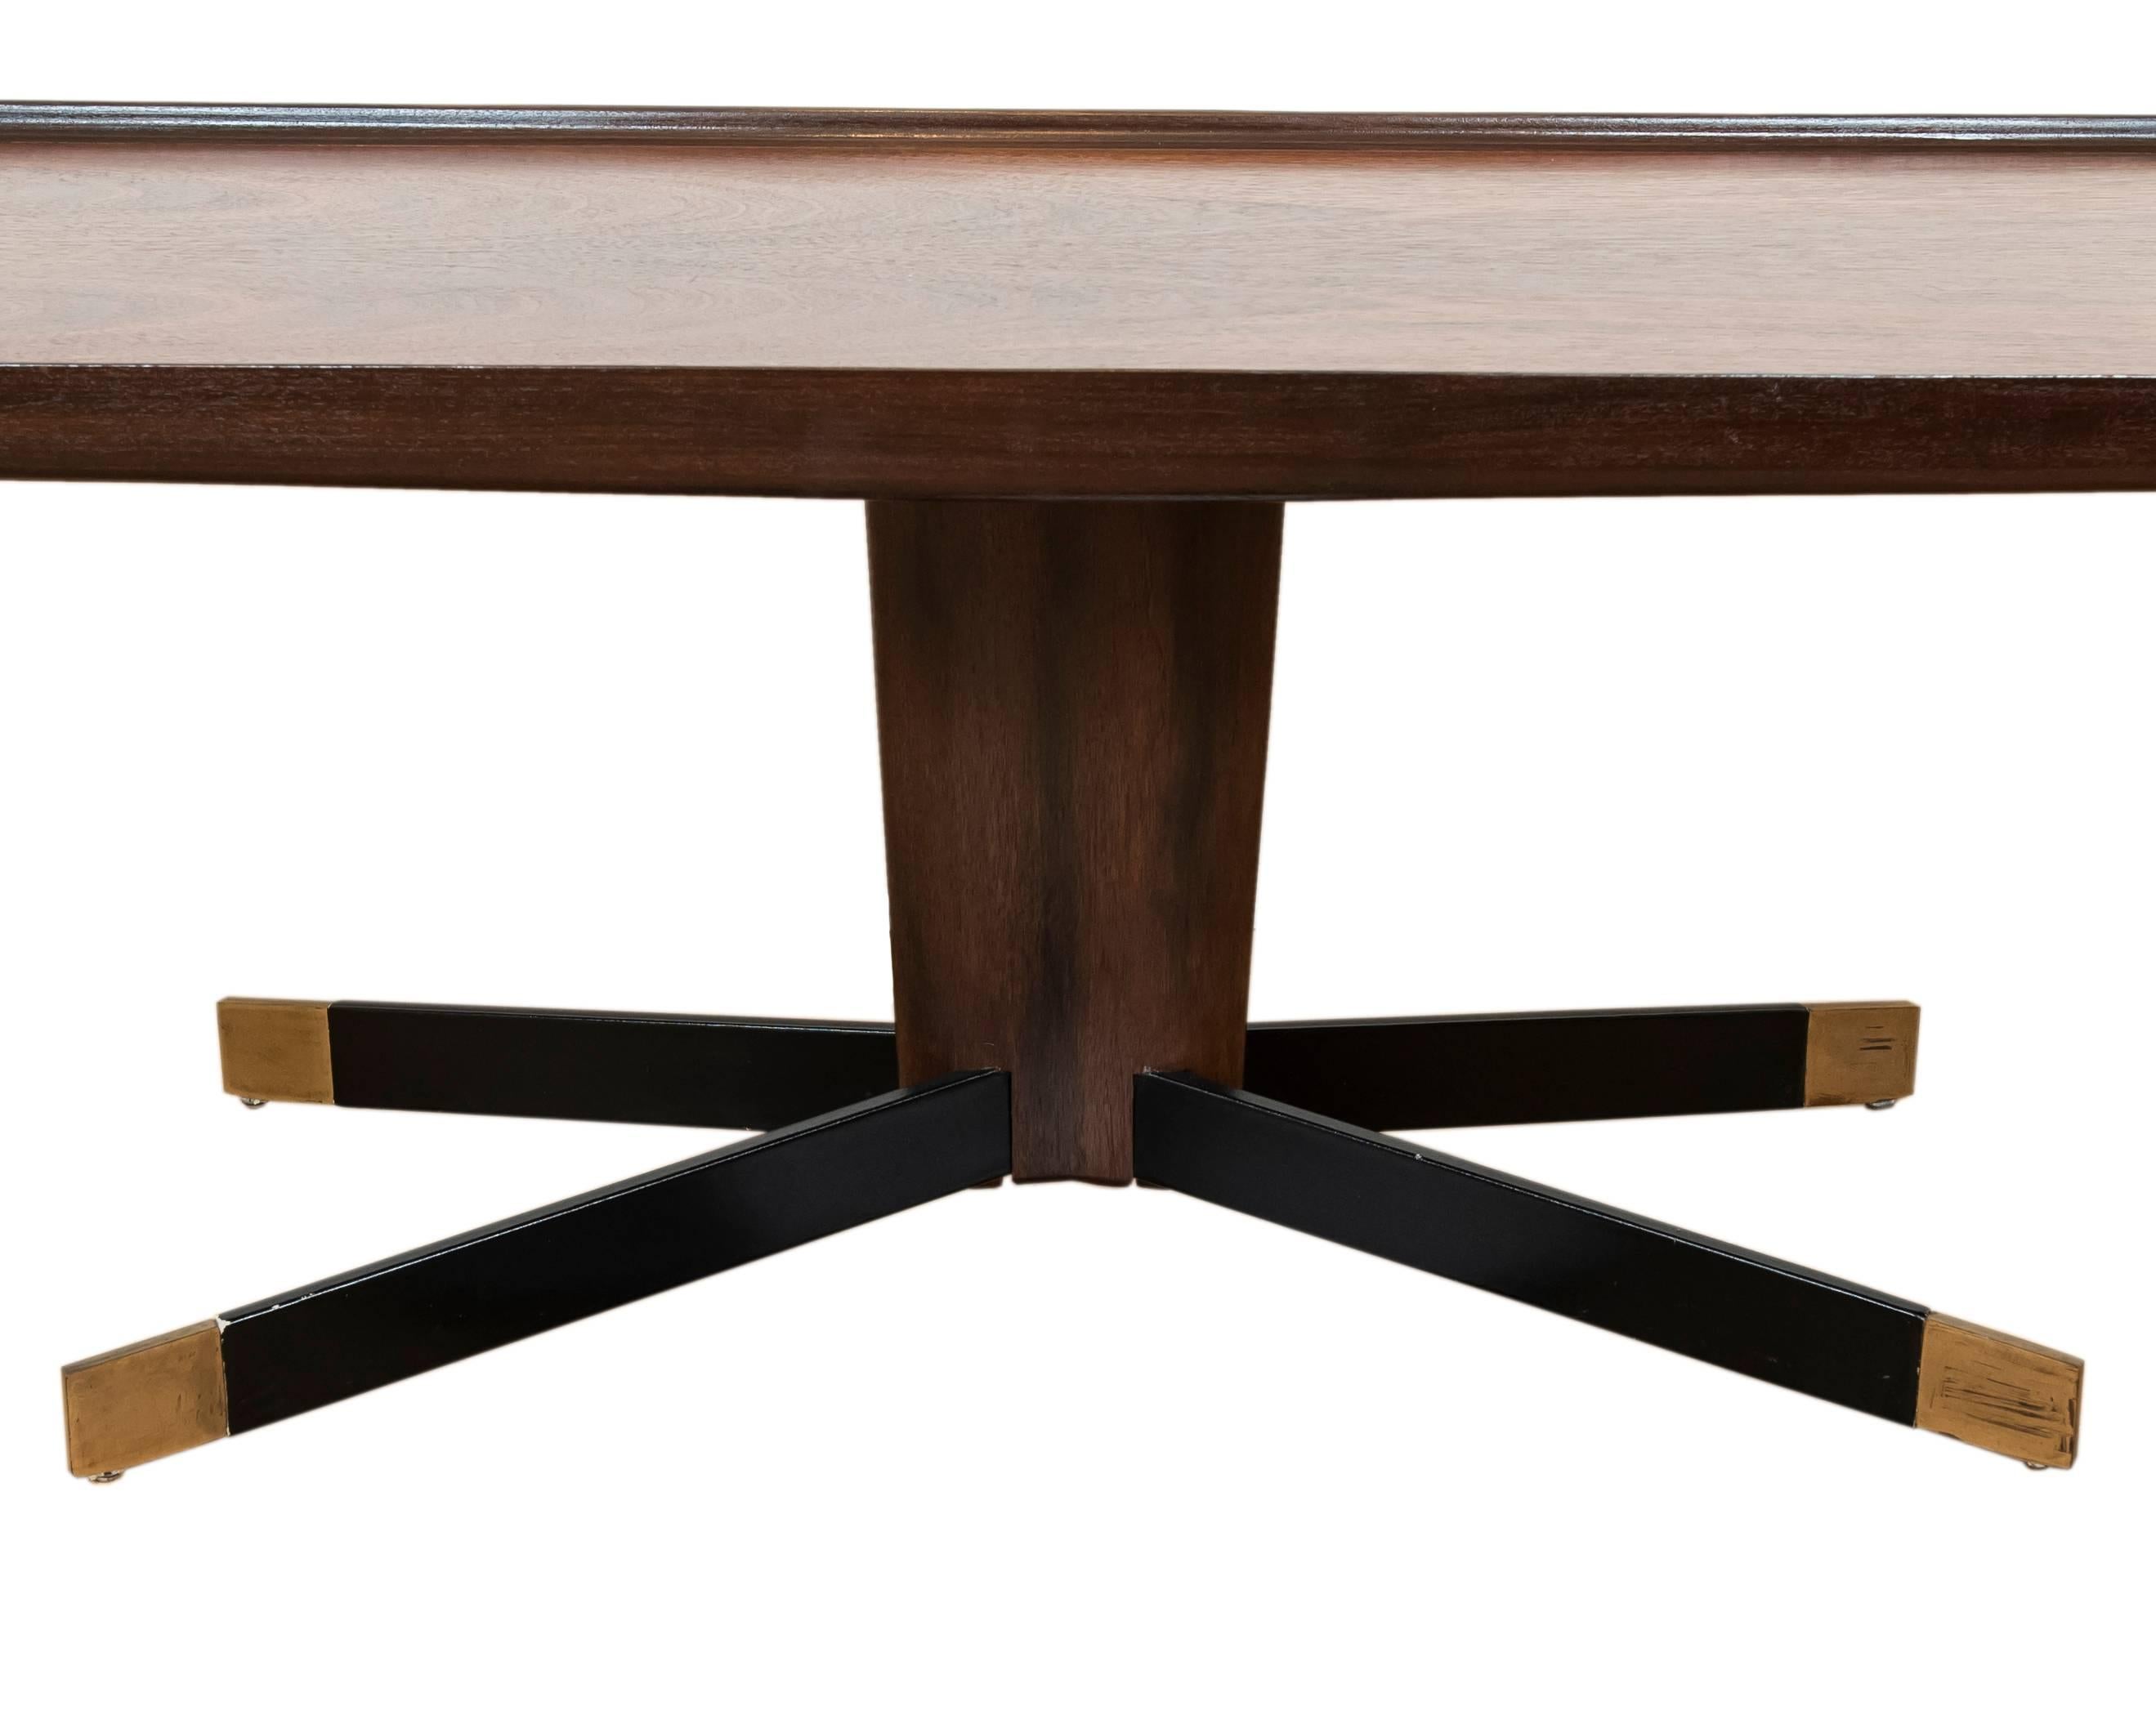 This unique and cool vintage wood coffee table with a richly grained walnut top, leather clad splayed legs with brass feet is ideal for the urbanite or cottager looking for a stylish and functional midcentury piece.
 